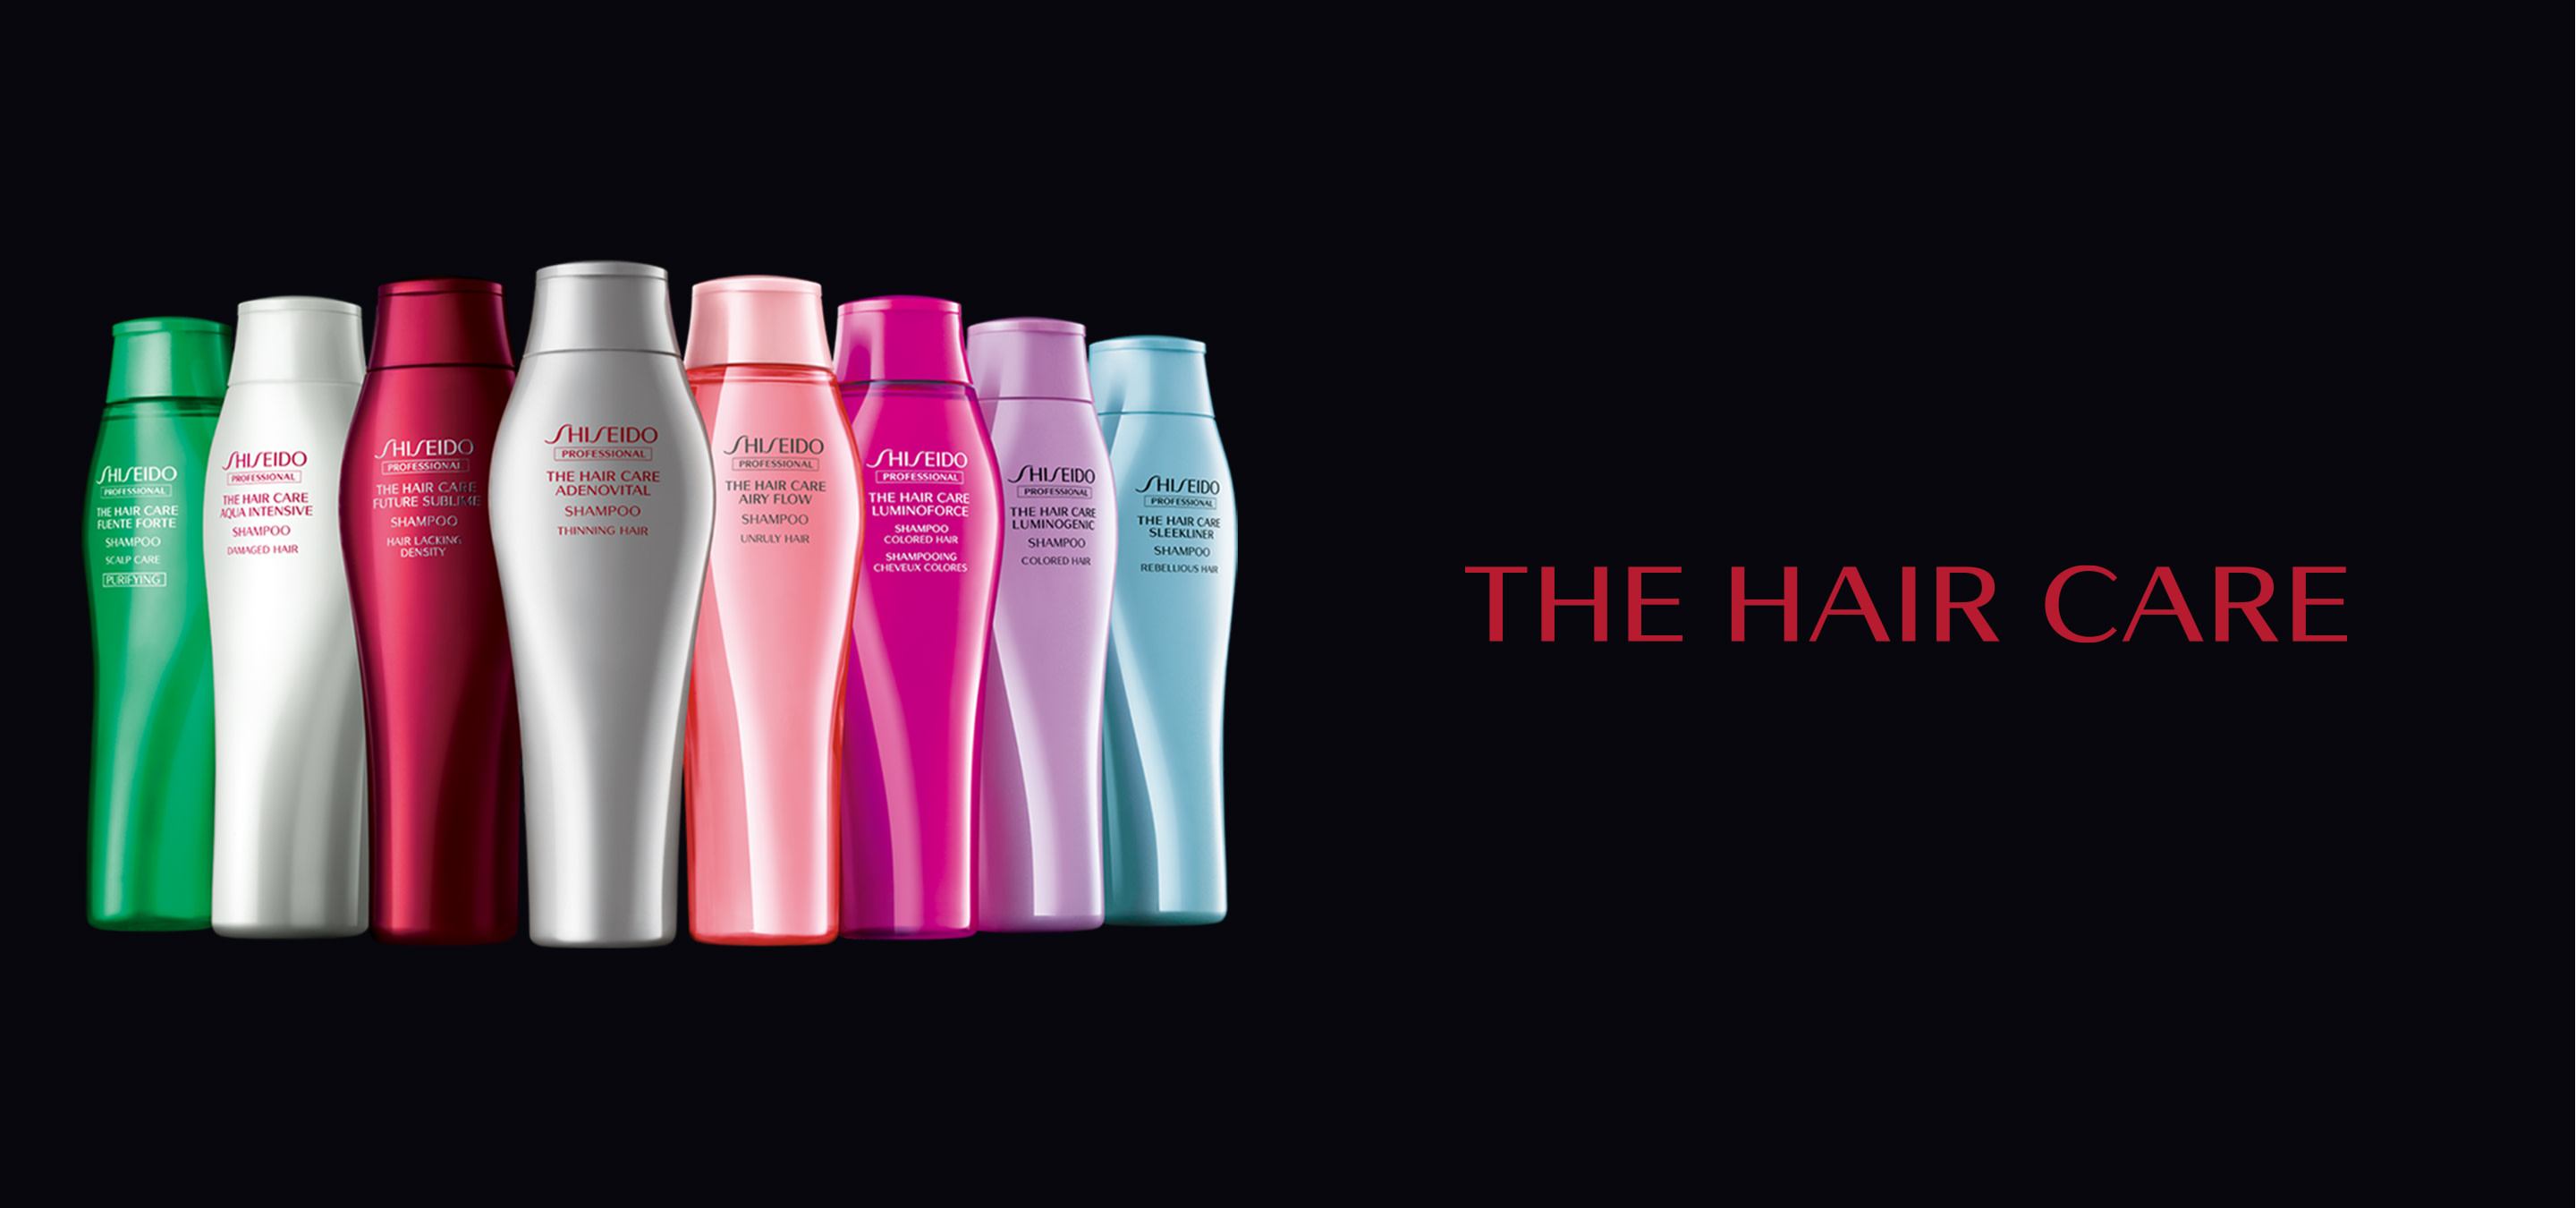 Shiseido Professional’s The Hair Care Products